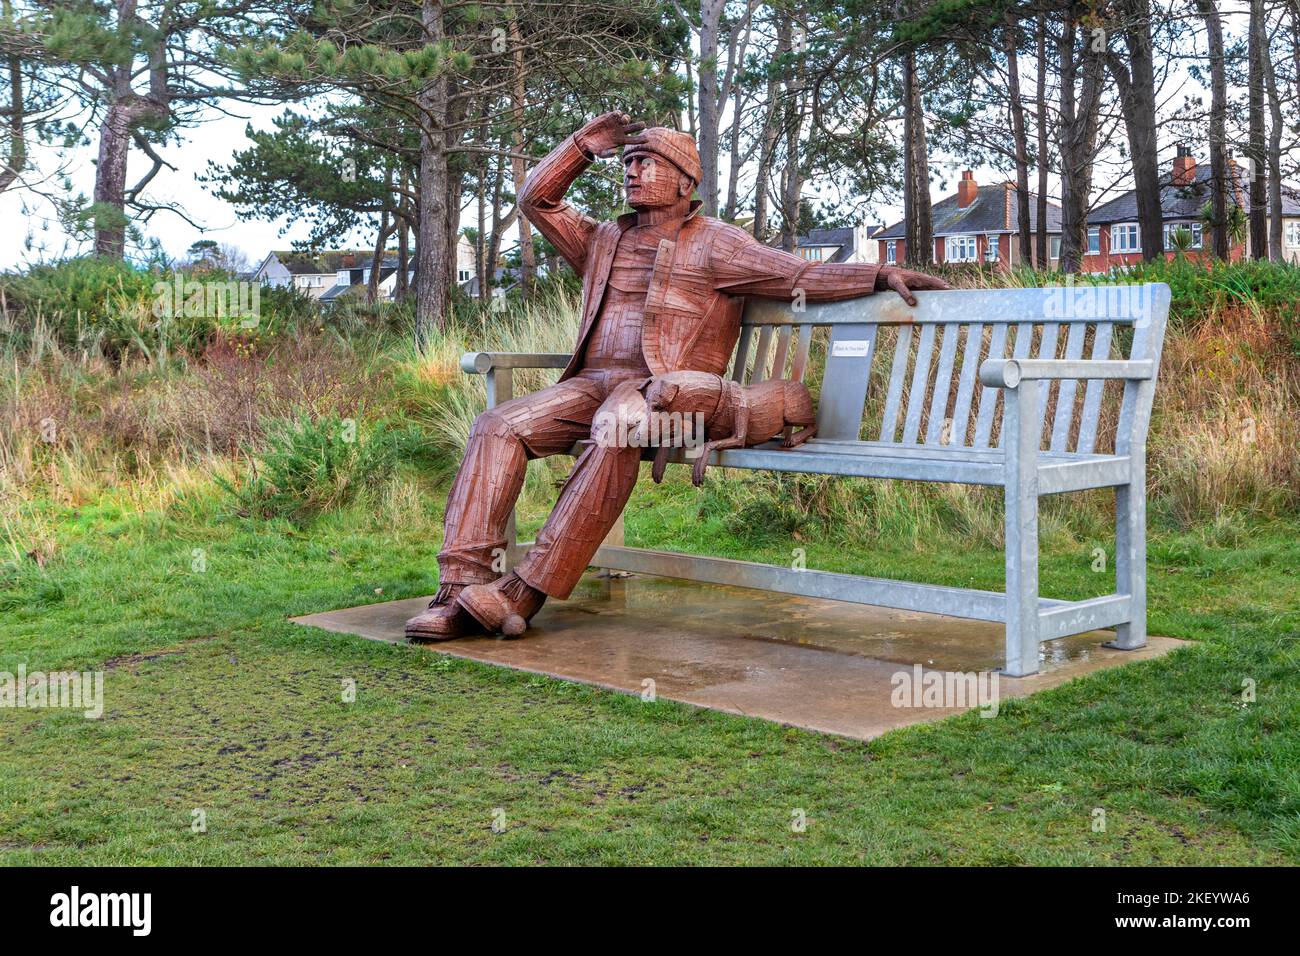 The sculpture entitled “Big Fella” is of a man and his dog taking in the beautiful sea views. The giant steel statue is 12 feet tall, Stock Photo